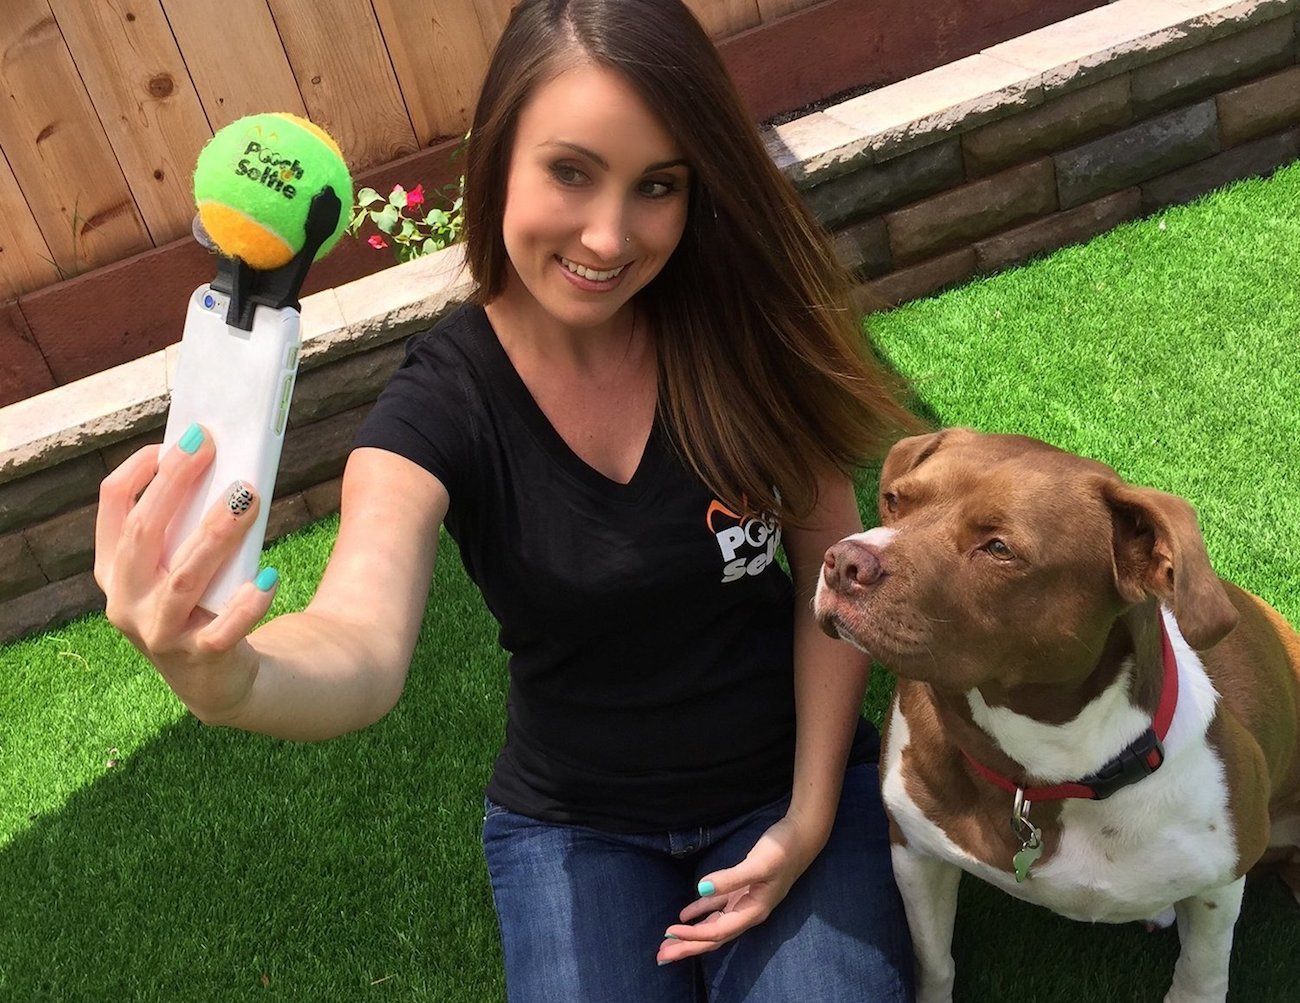 Dog lover poses with her pet using the puppy selfie stick.&nbsp;Source: GadgetFlow